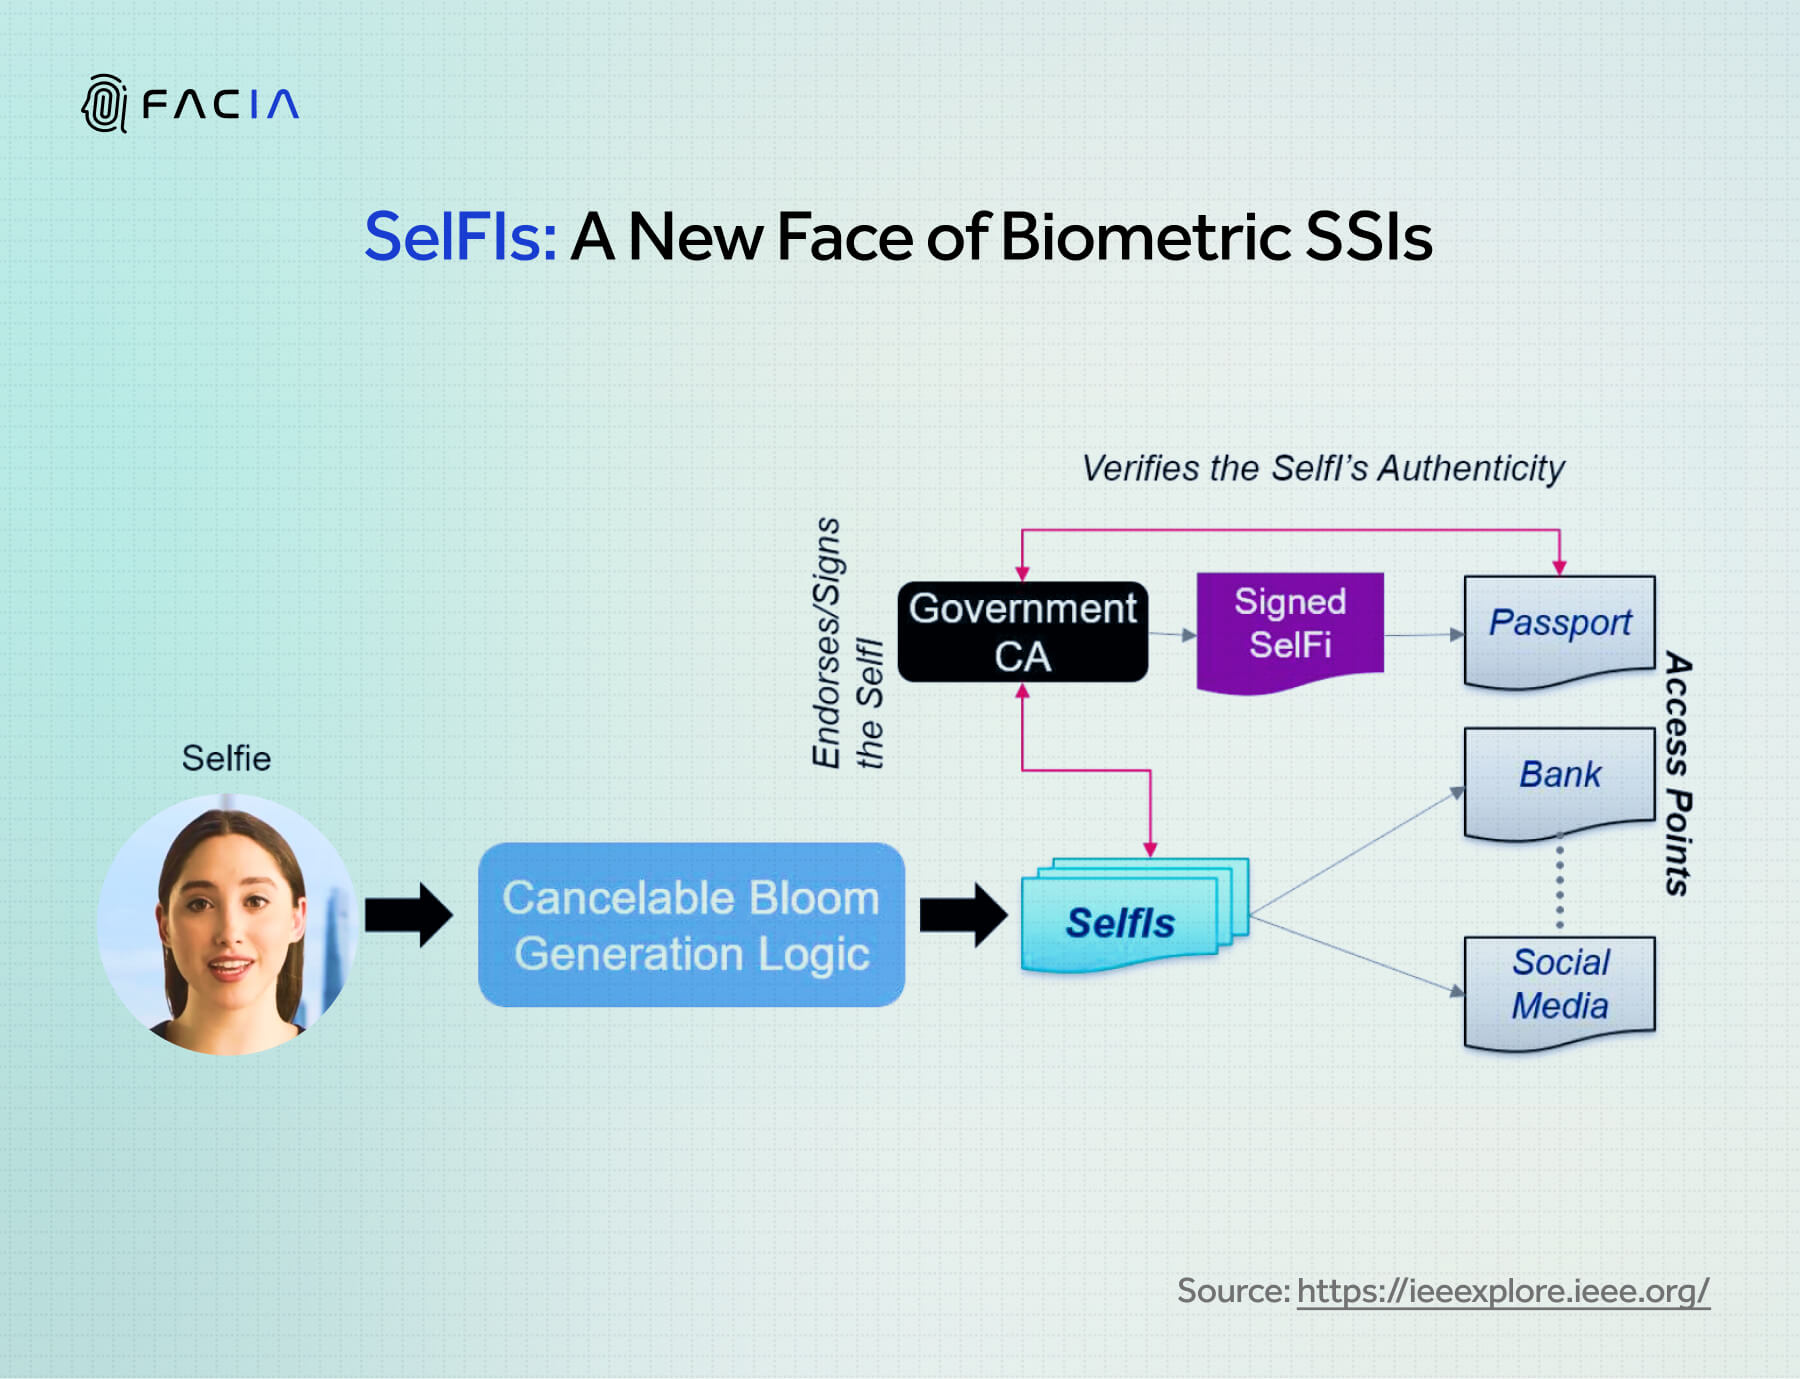 SelFIs are a new way of developing Self-Sovereign Identity (SSI) via a Selfie Image through cancelable biometric technology.